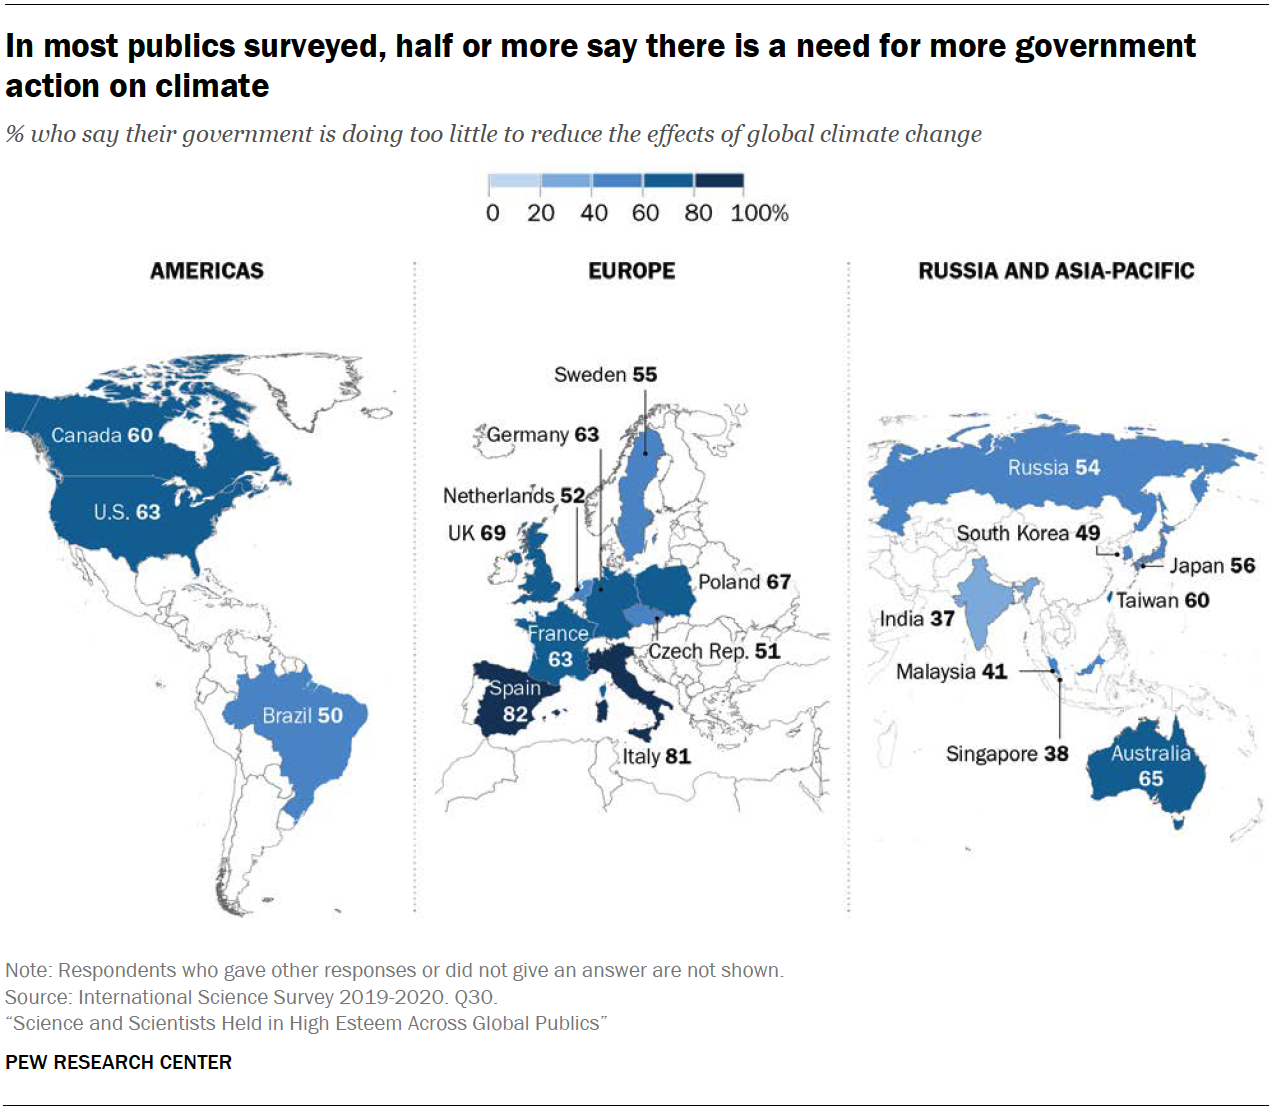 Chart shows in most publics surveyed, half or more say there is a need for more government action on climate